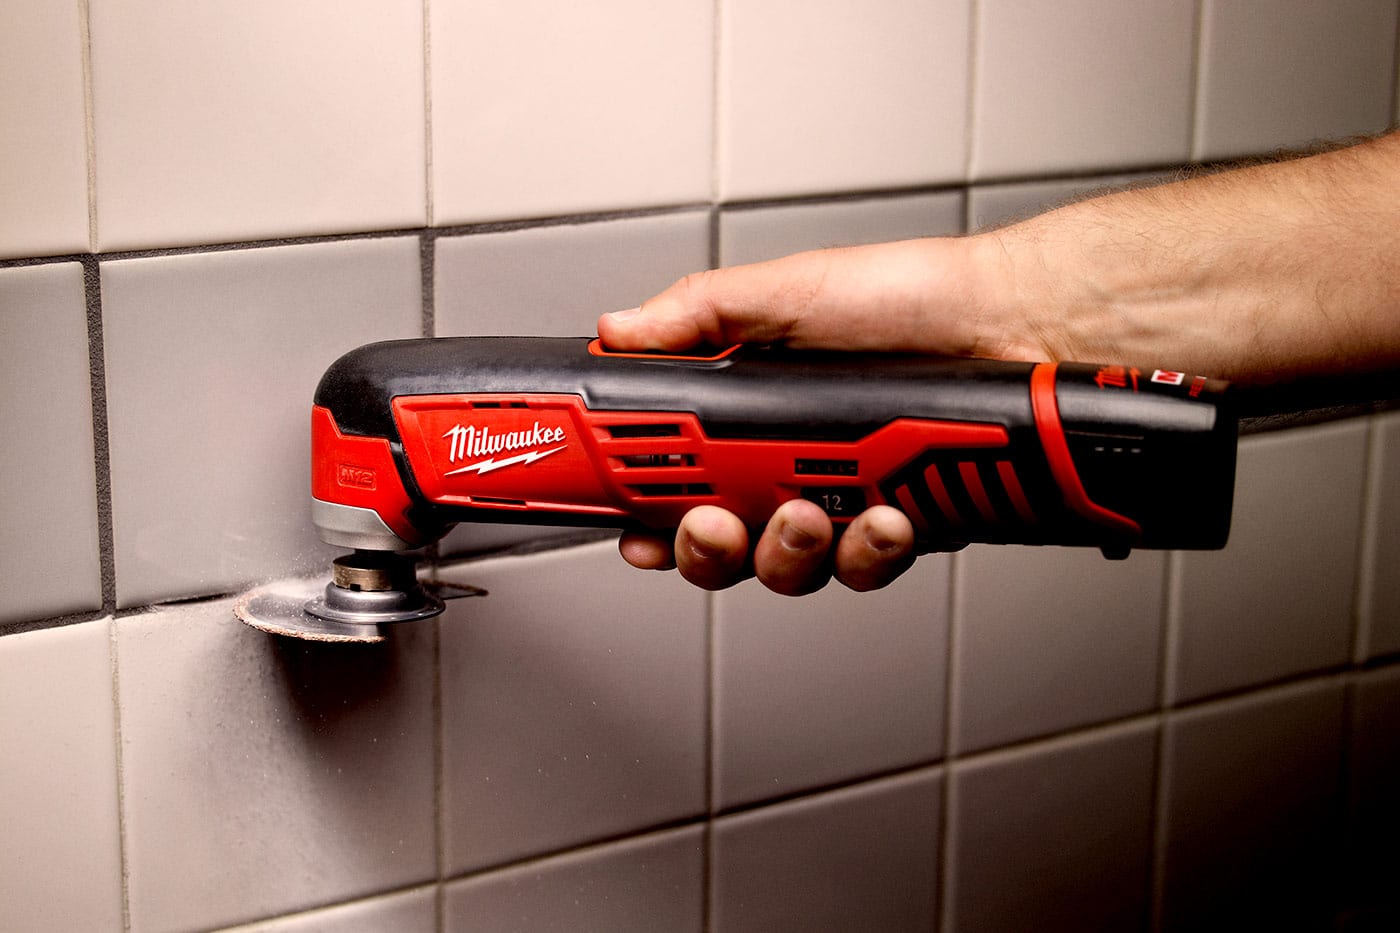 https://westlakehardware.com/wp-content/uploads/2022/12/Milwaukee-Grout-Removal-Tool-InPage.jpg